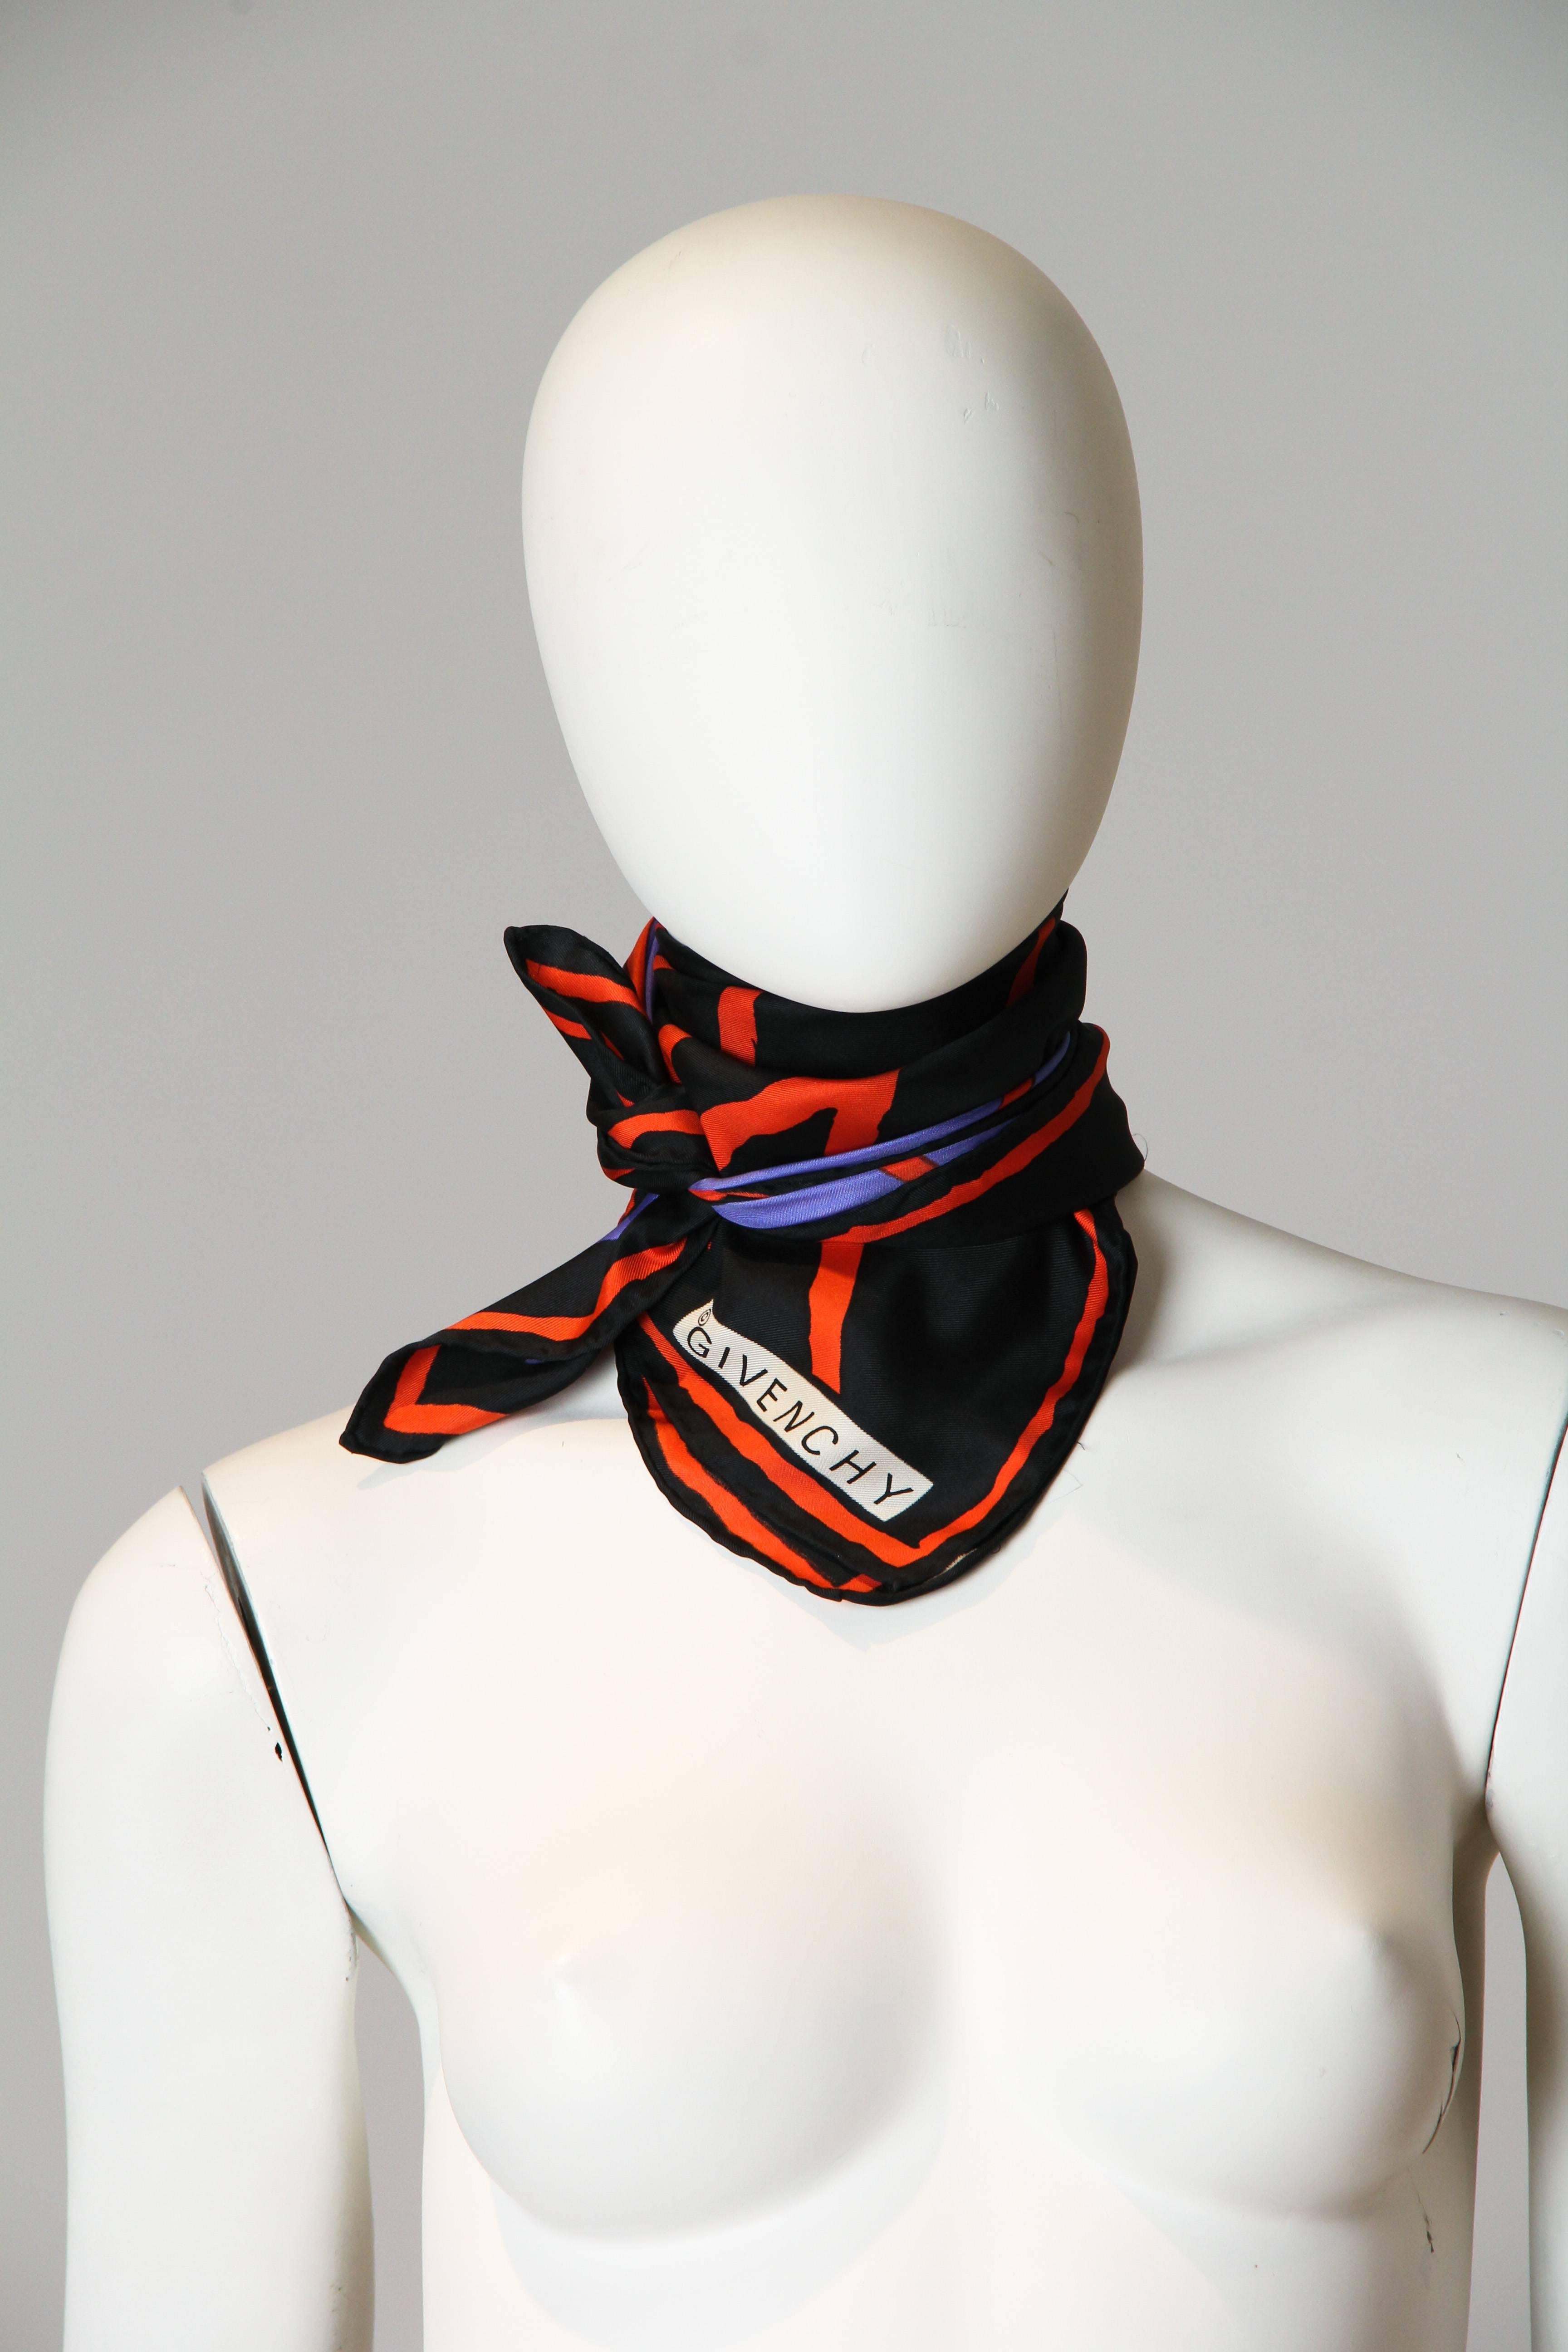 This is a classic square silk scarf by legendary design house Givenchy. In graphic blocks of periwinkle, red-orange, and black, it is perhaps the easiest-to-style statement piece there is. The colours are arranged in an abstract expressionist